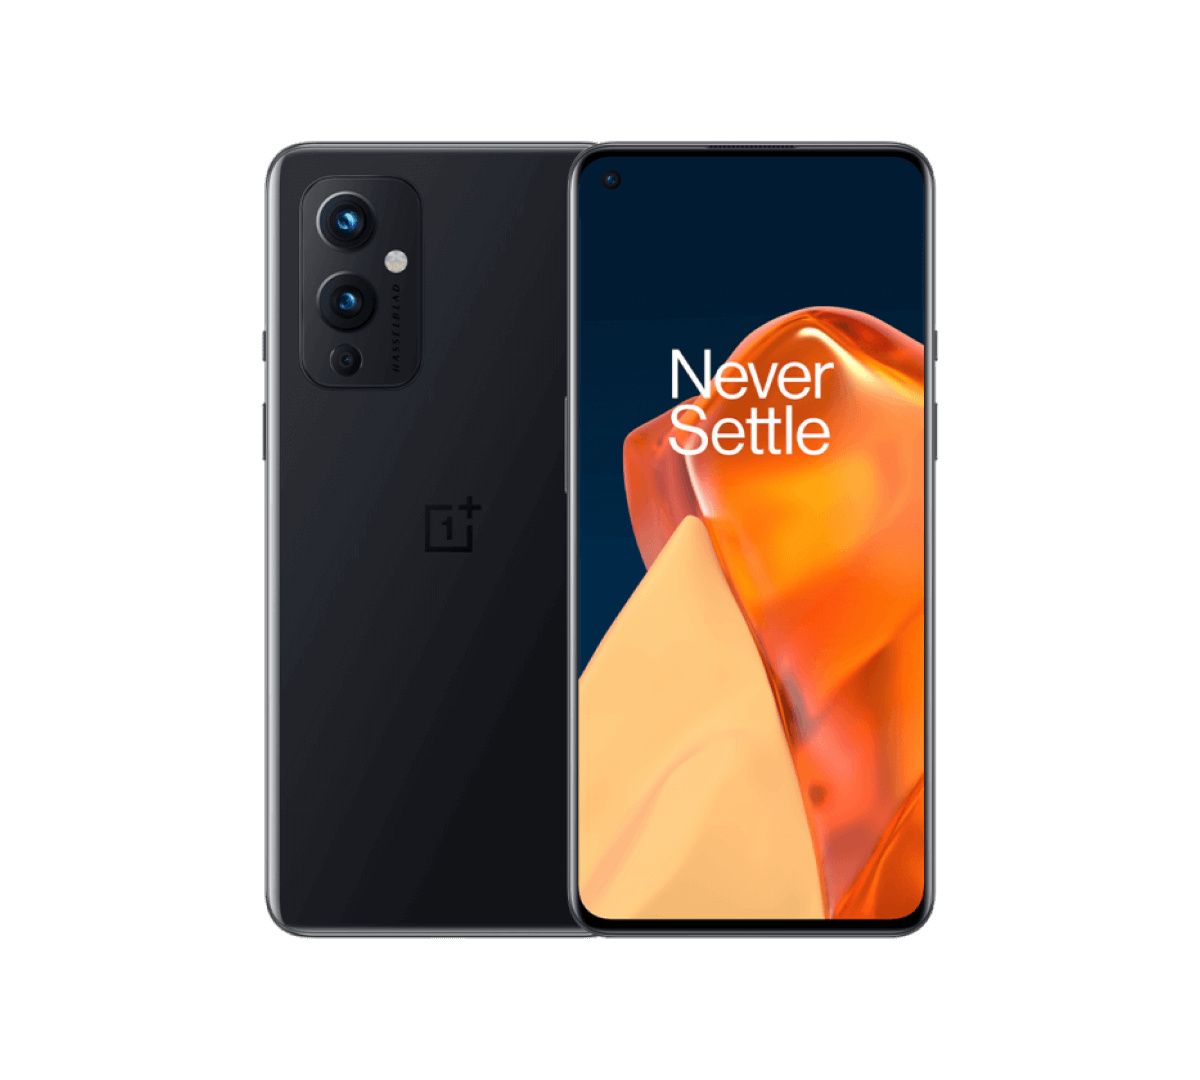 The OnePlus 9 offers a 6.5-inch AMOLED display, Snapdragon 888, and a 4,500mAh battery with 65W fast charging support.